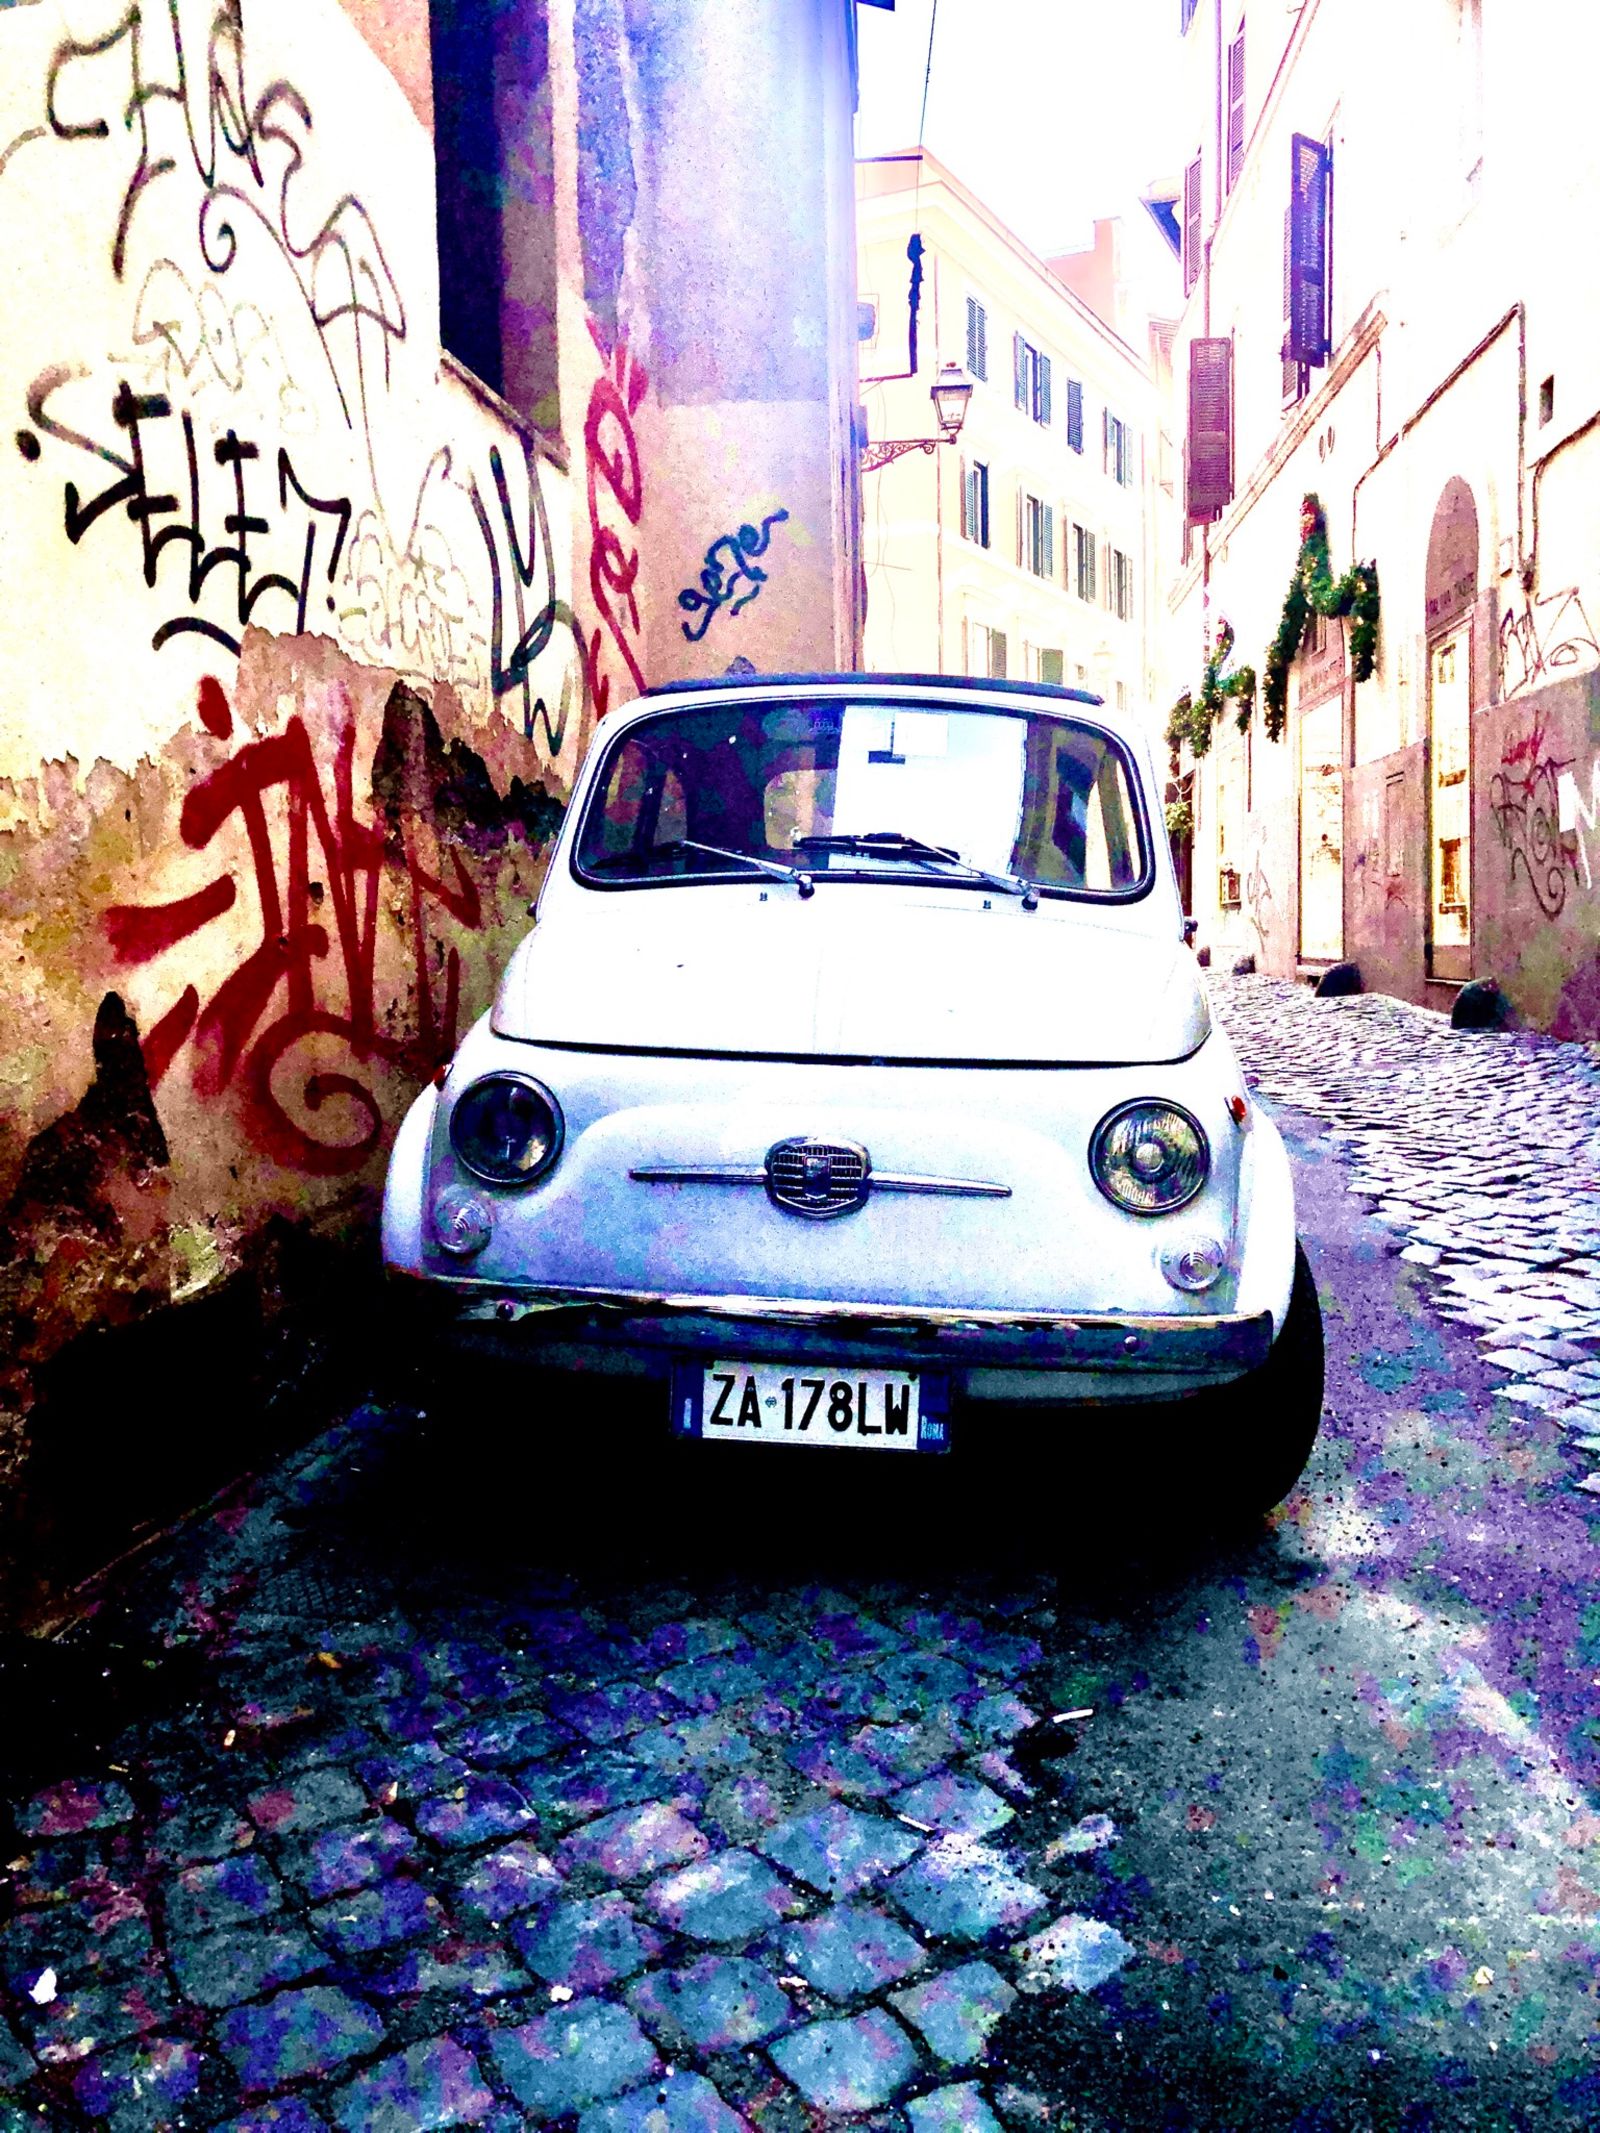 Illustration for article titled My FIAT photos arrived